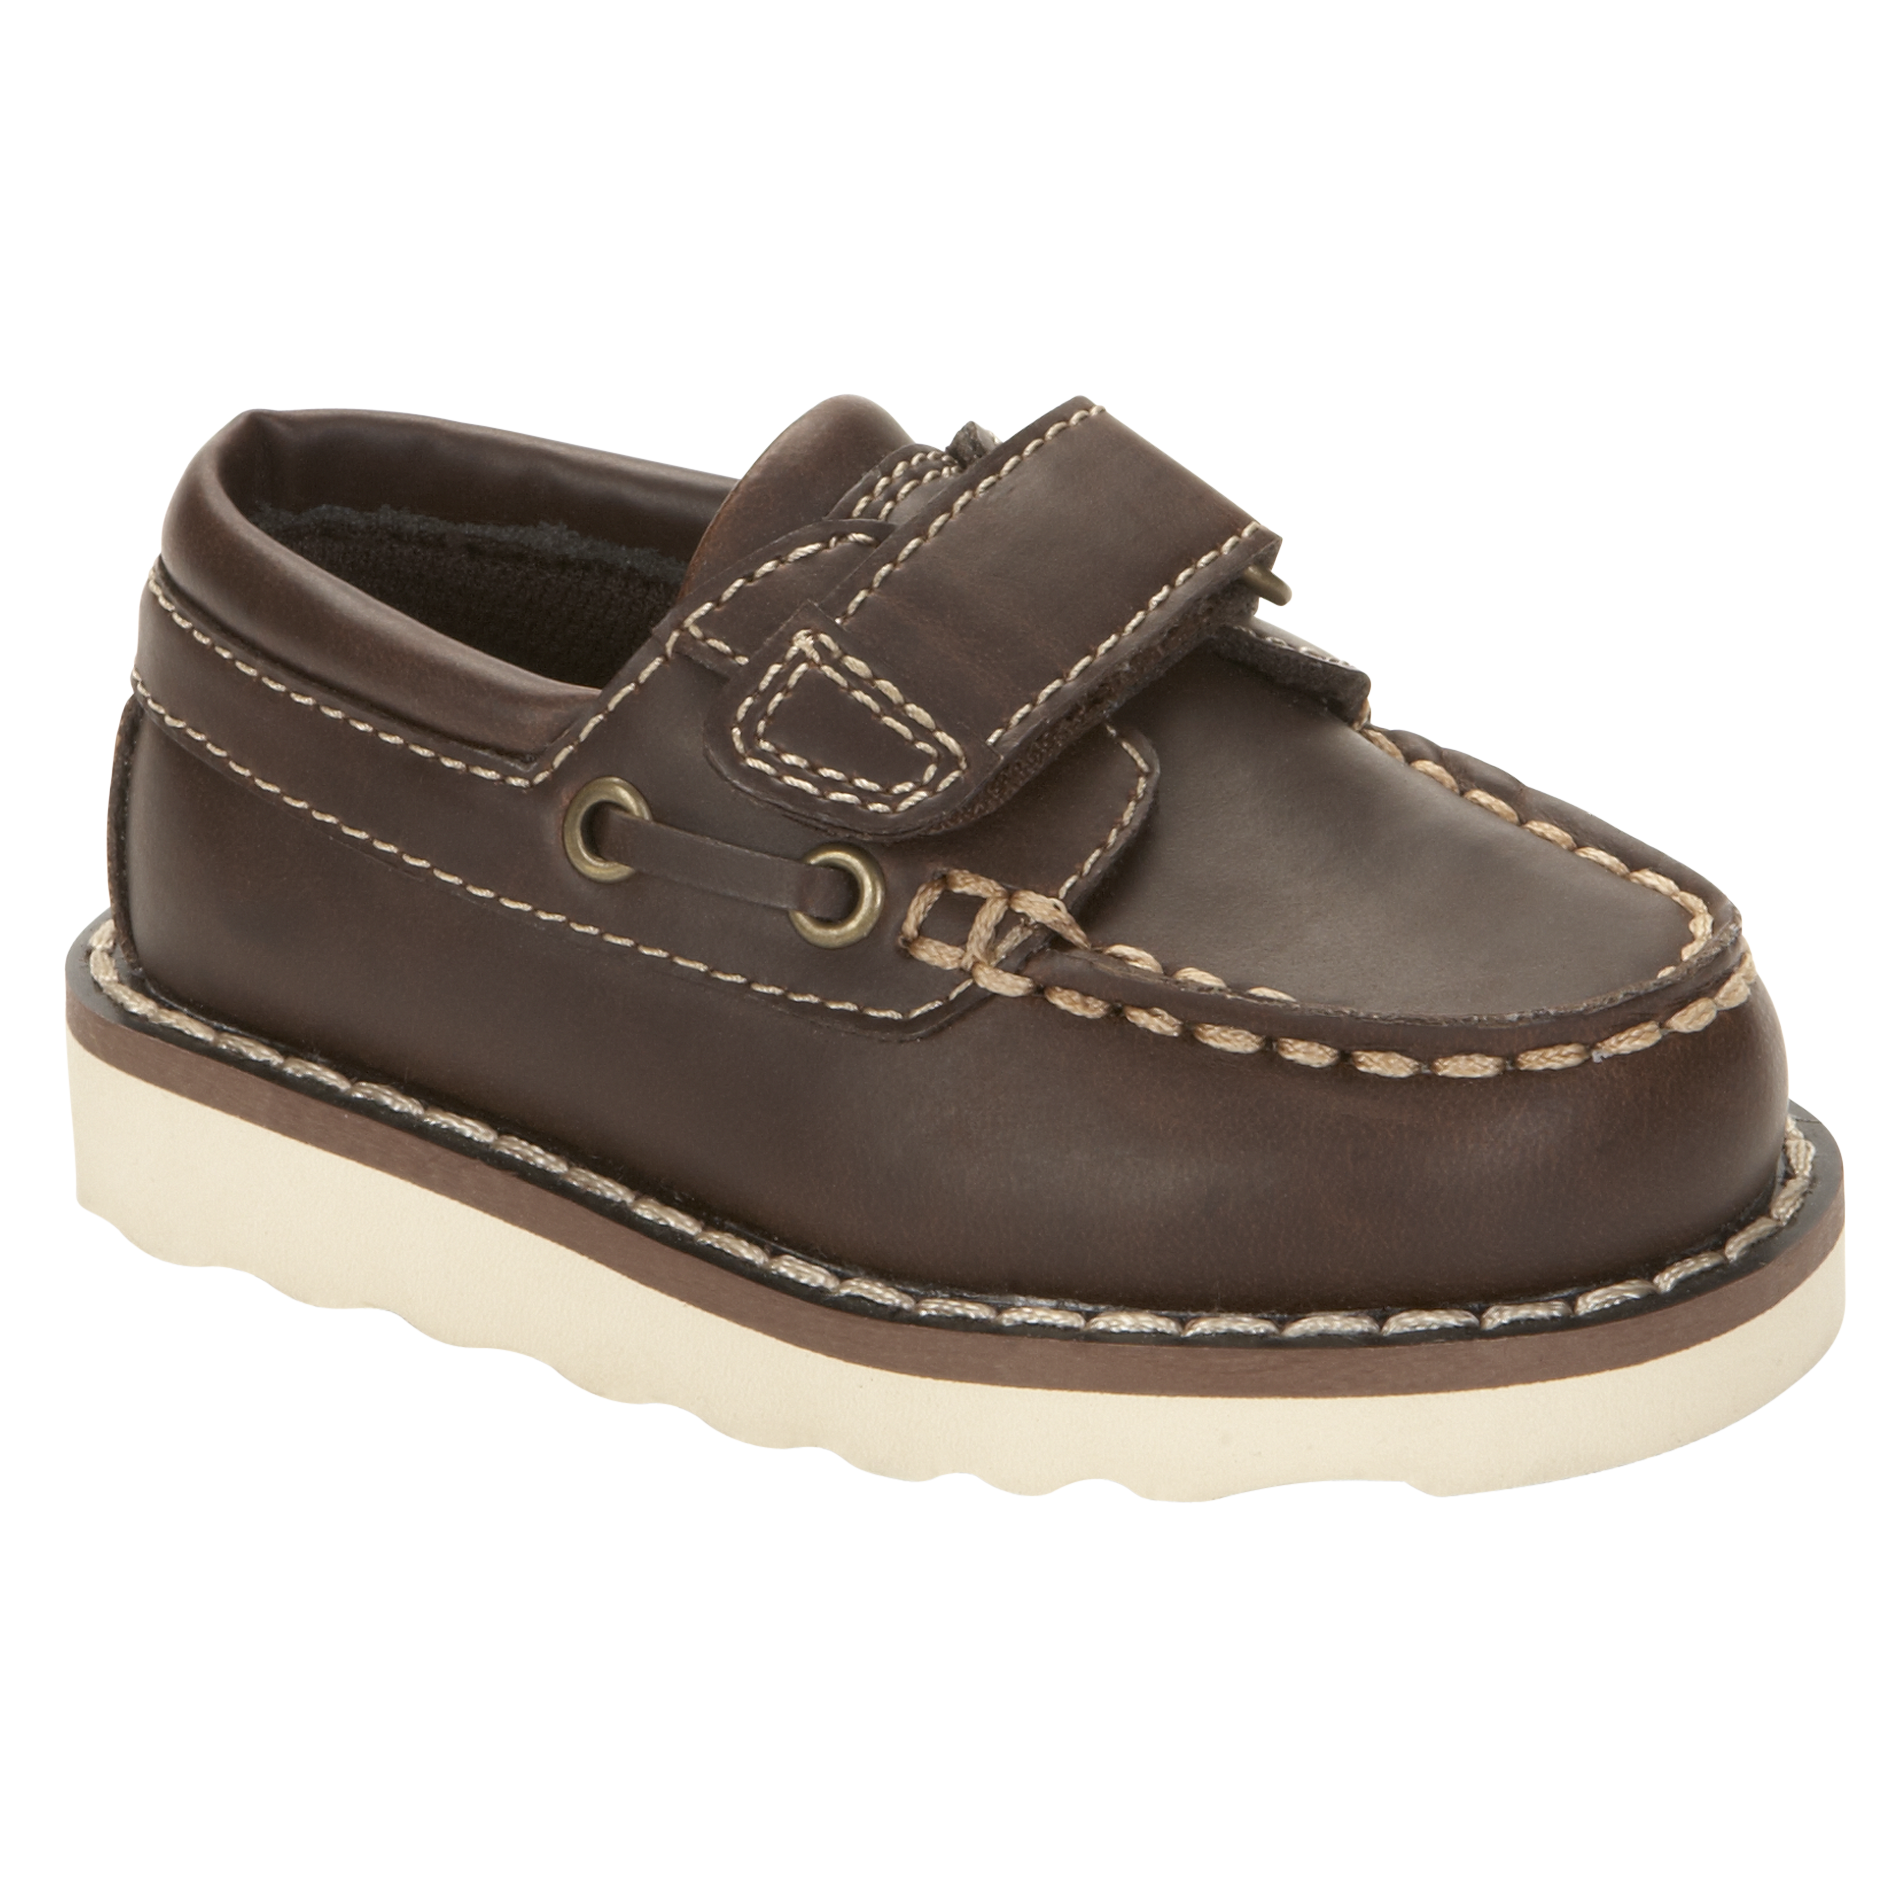 Route 66 Baby Boy's Casual Shoe Ruy - Brown